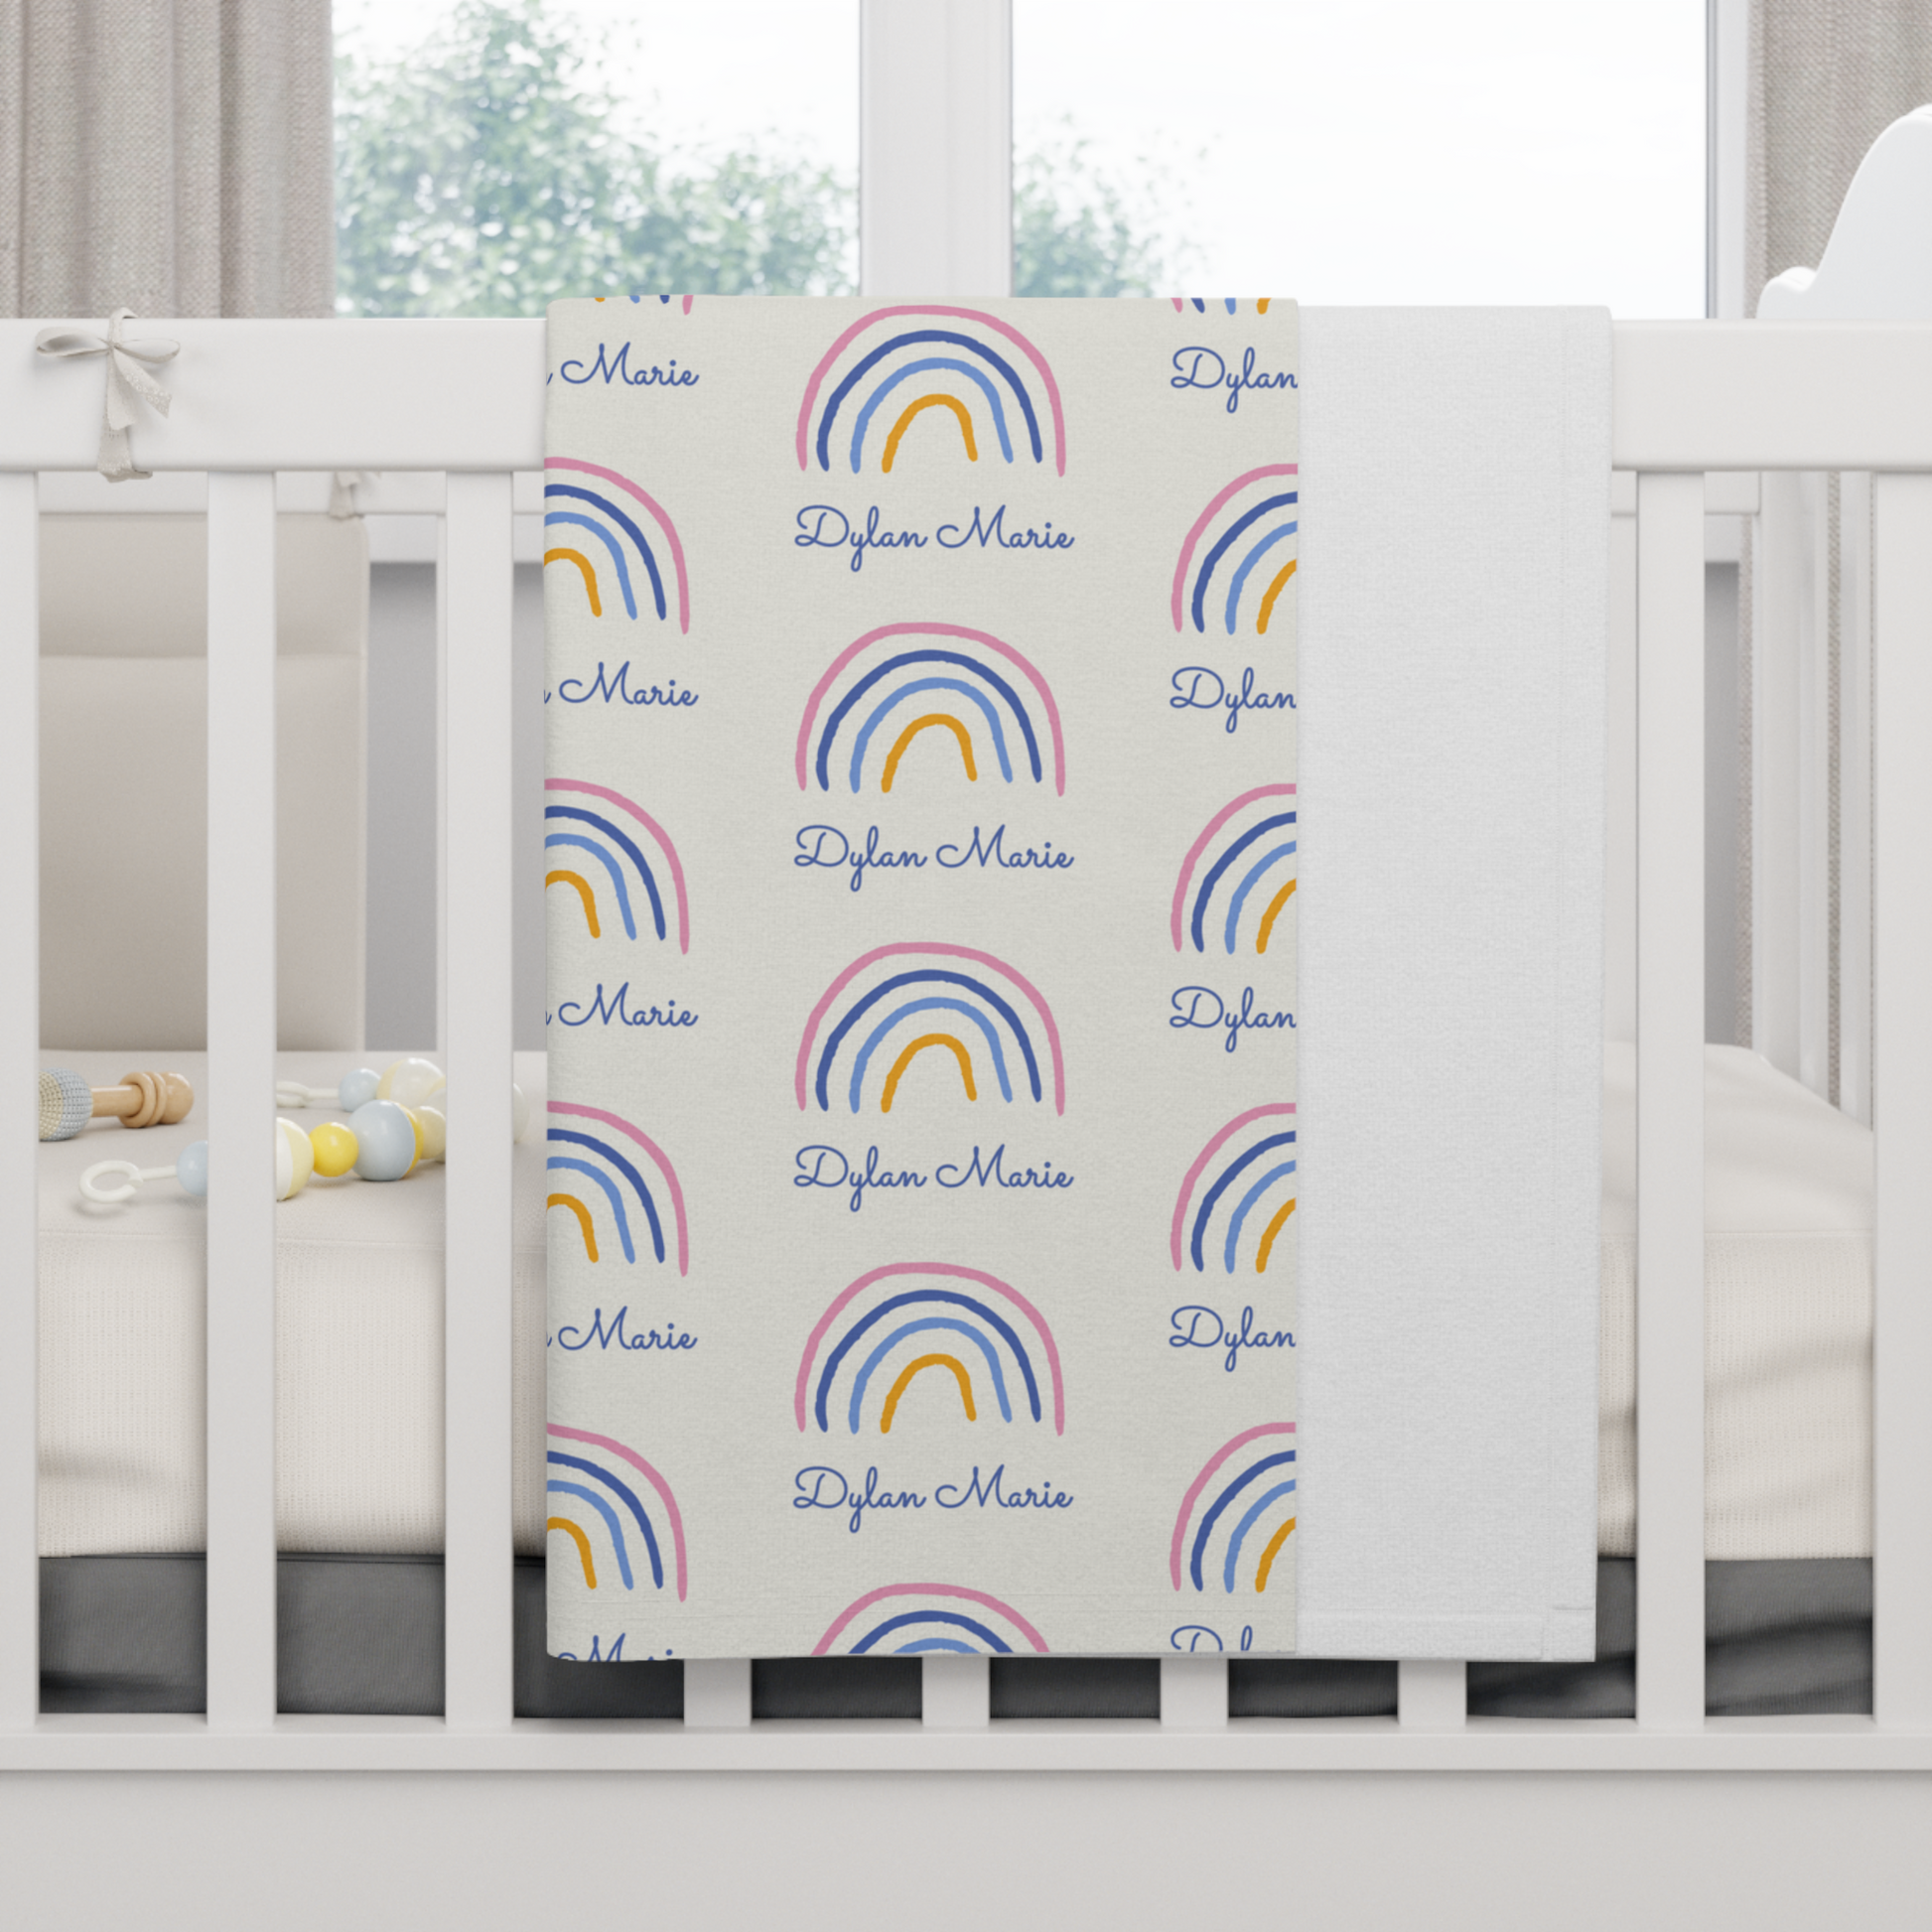 Fleece personalized baby blanket in rainbow pattern hung over side of white crib with window in the background